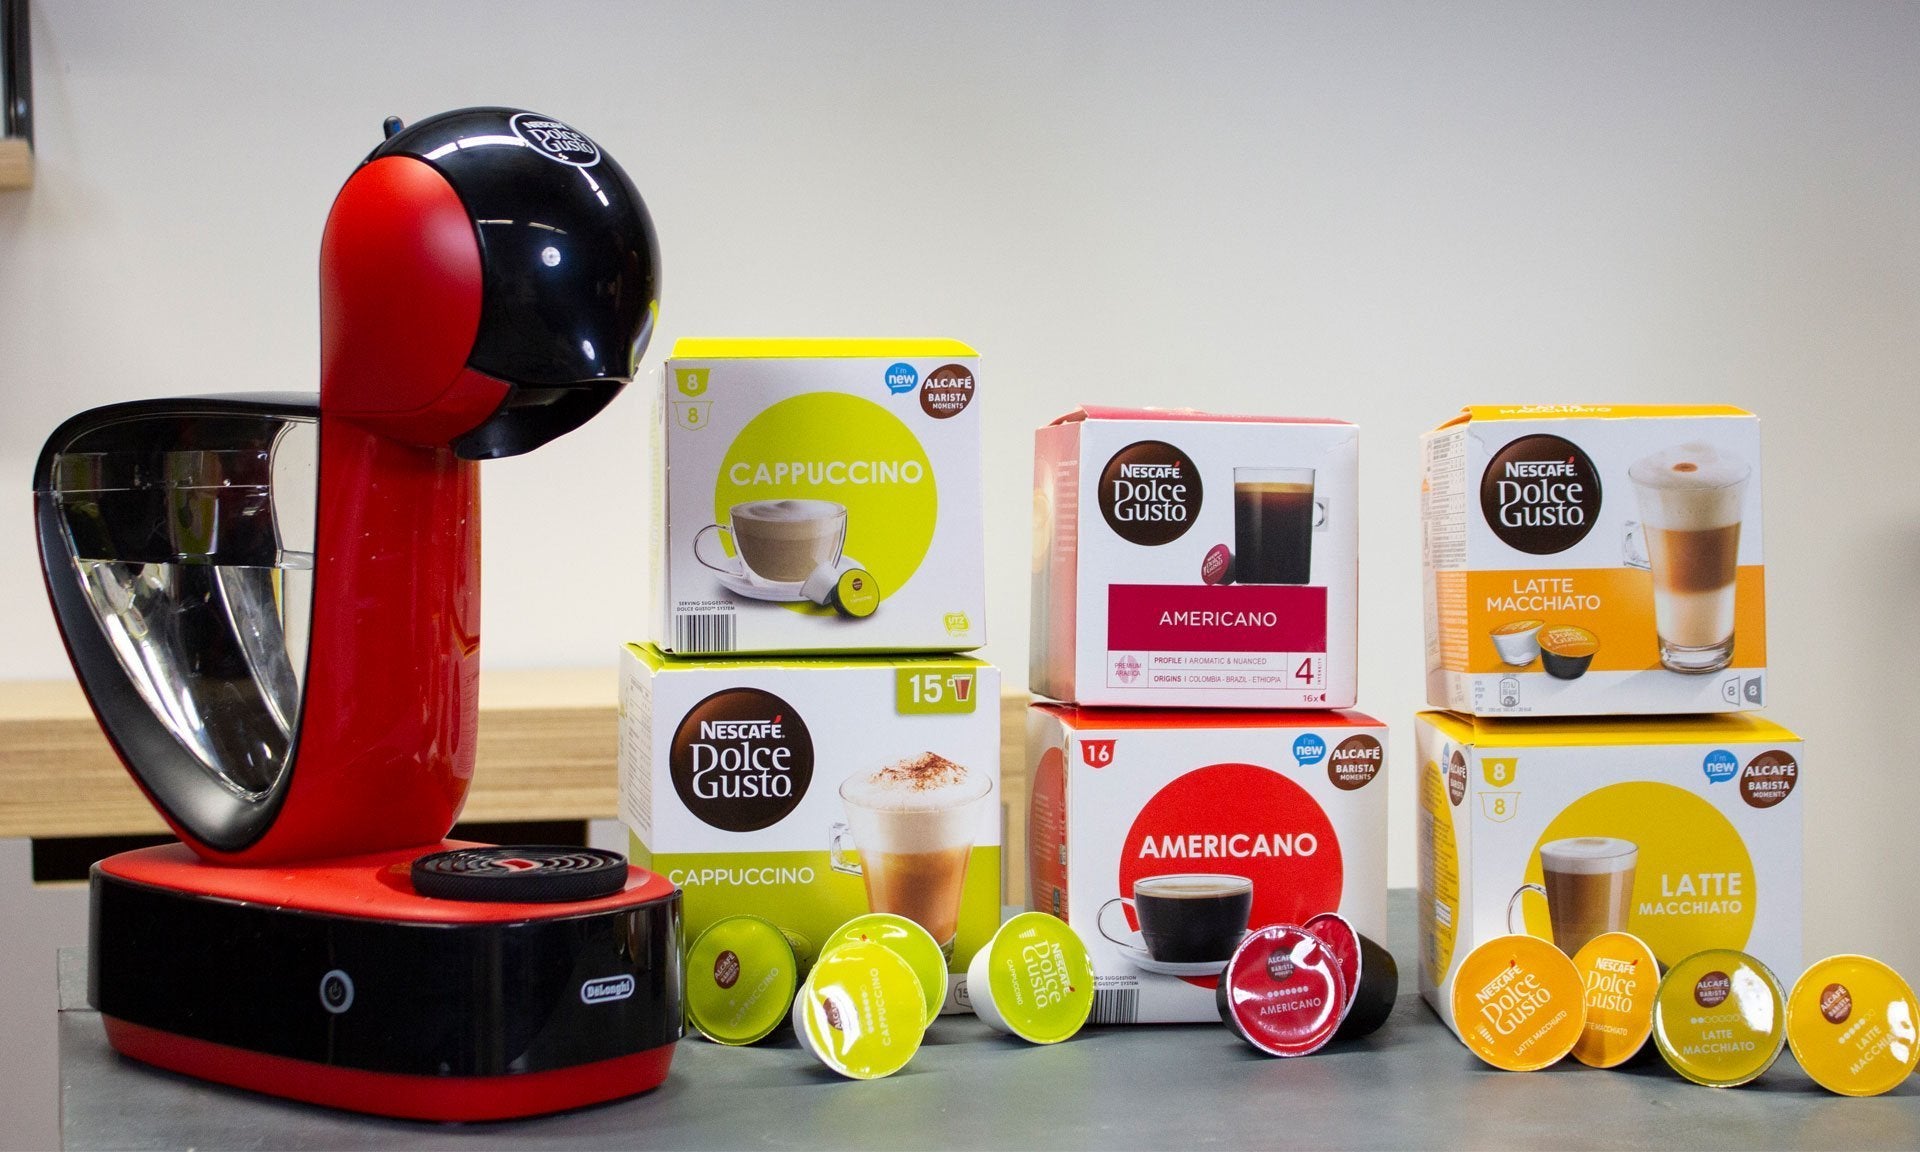 Cappuccino pods Dolce Gusto®